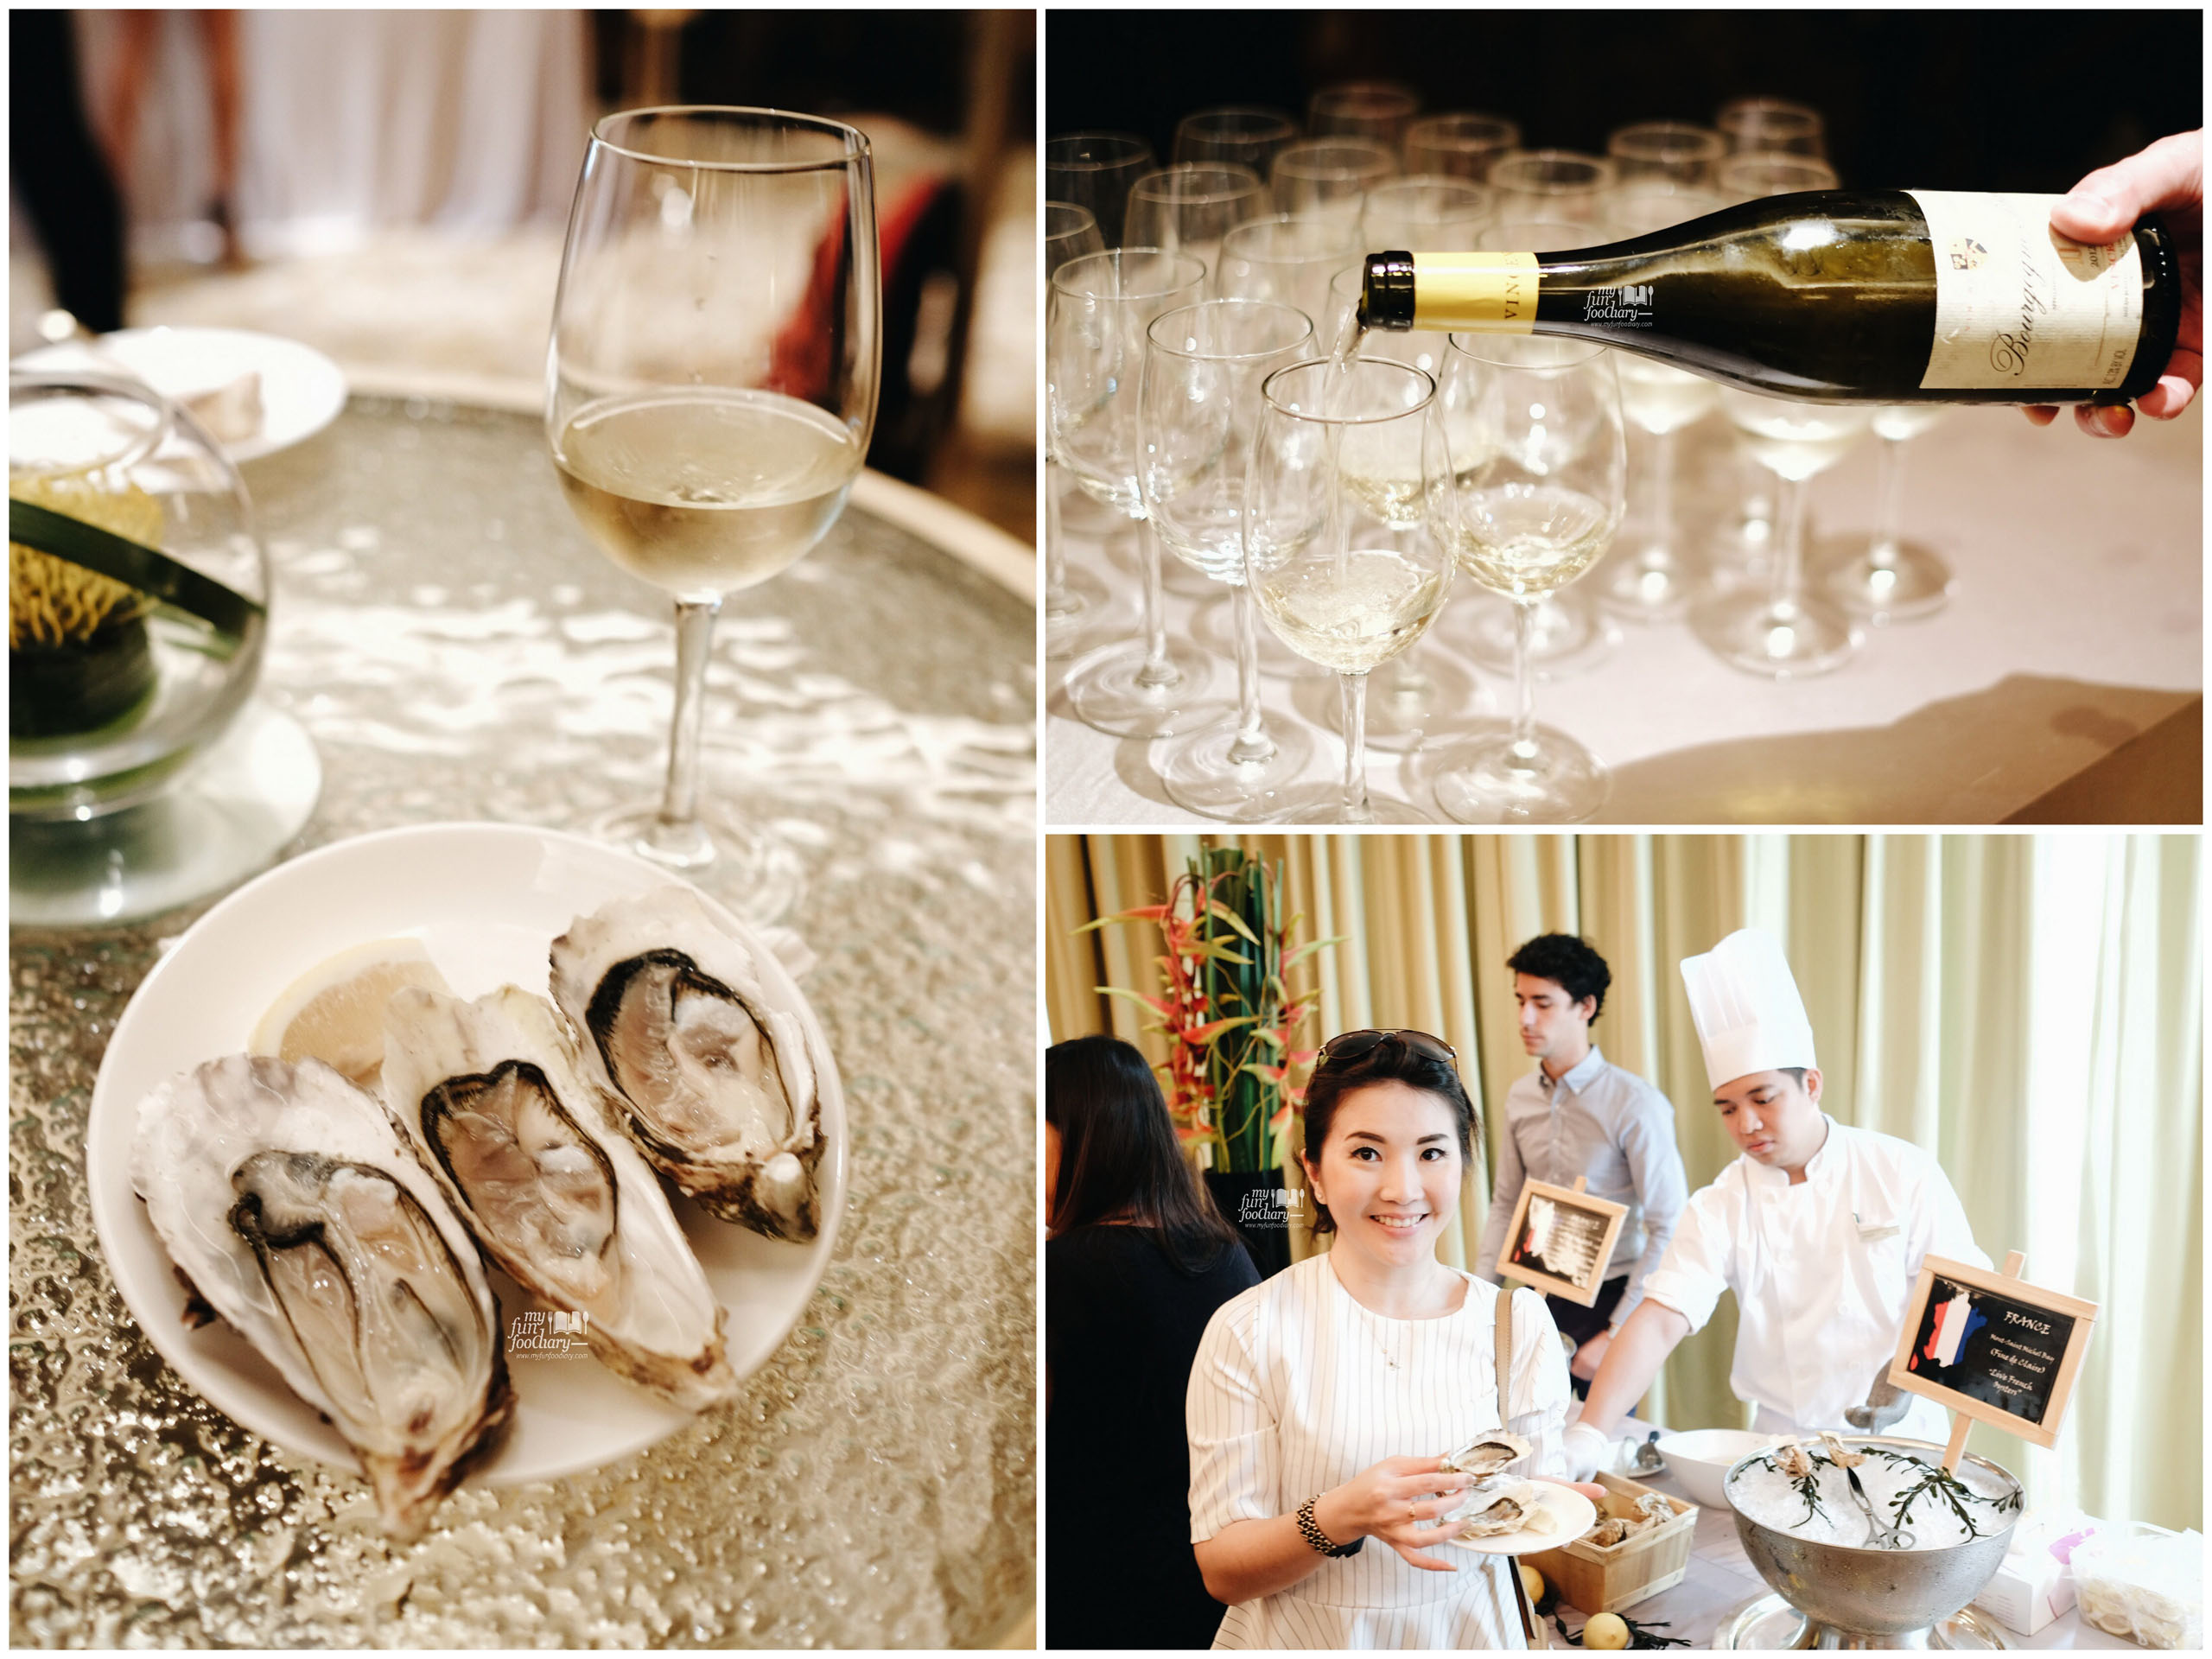 France Oysters pairs with White Wine at Conrad Singapore by Myfunfoodiary